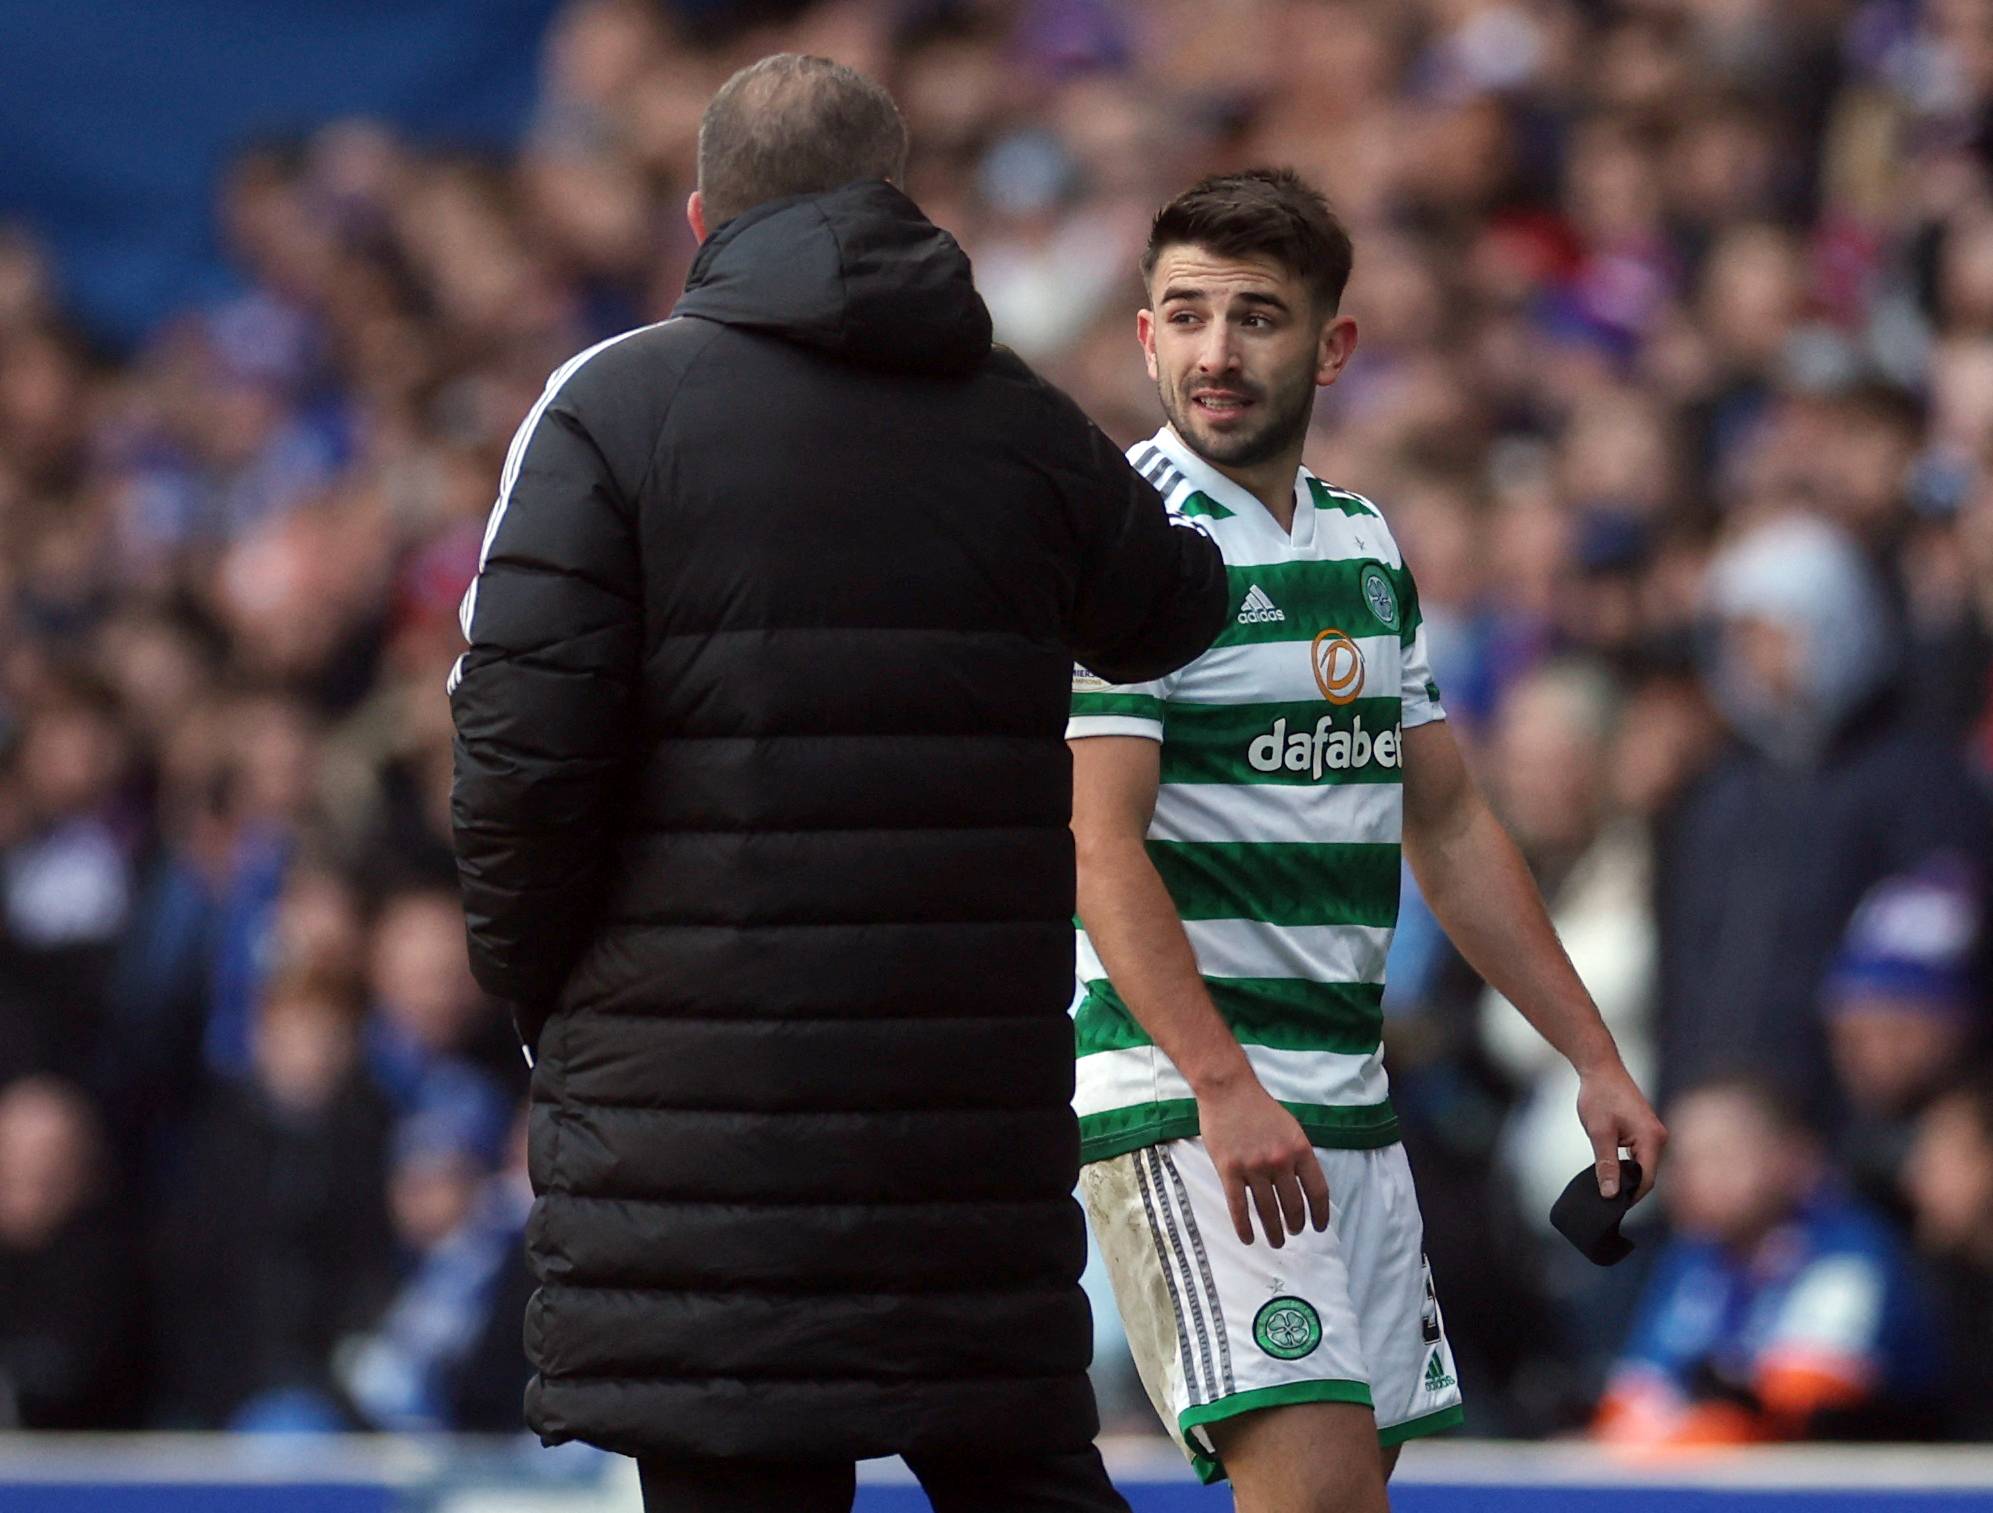 Celtic 'should elaborate' further on injury to Greg Taylor - Celtic News